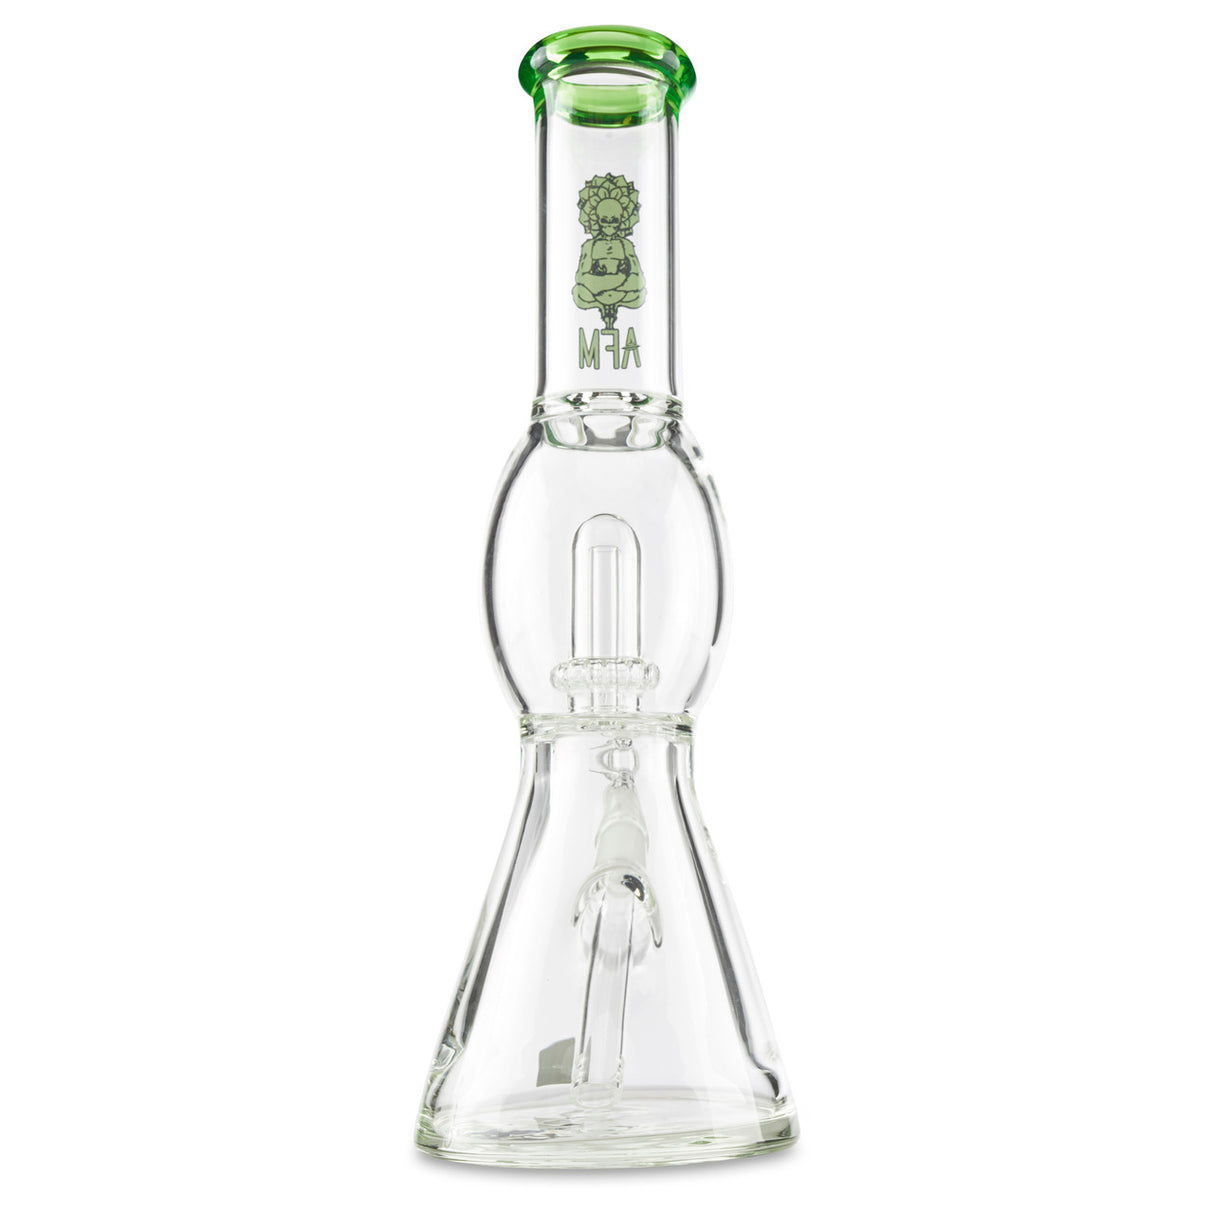 afm short green bong for smoking herbs and tobacco